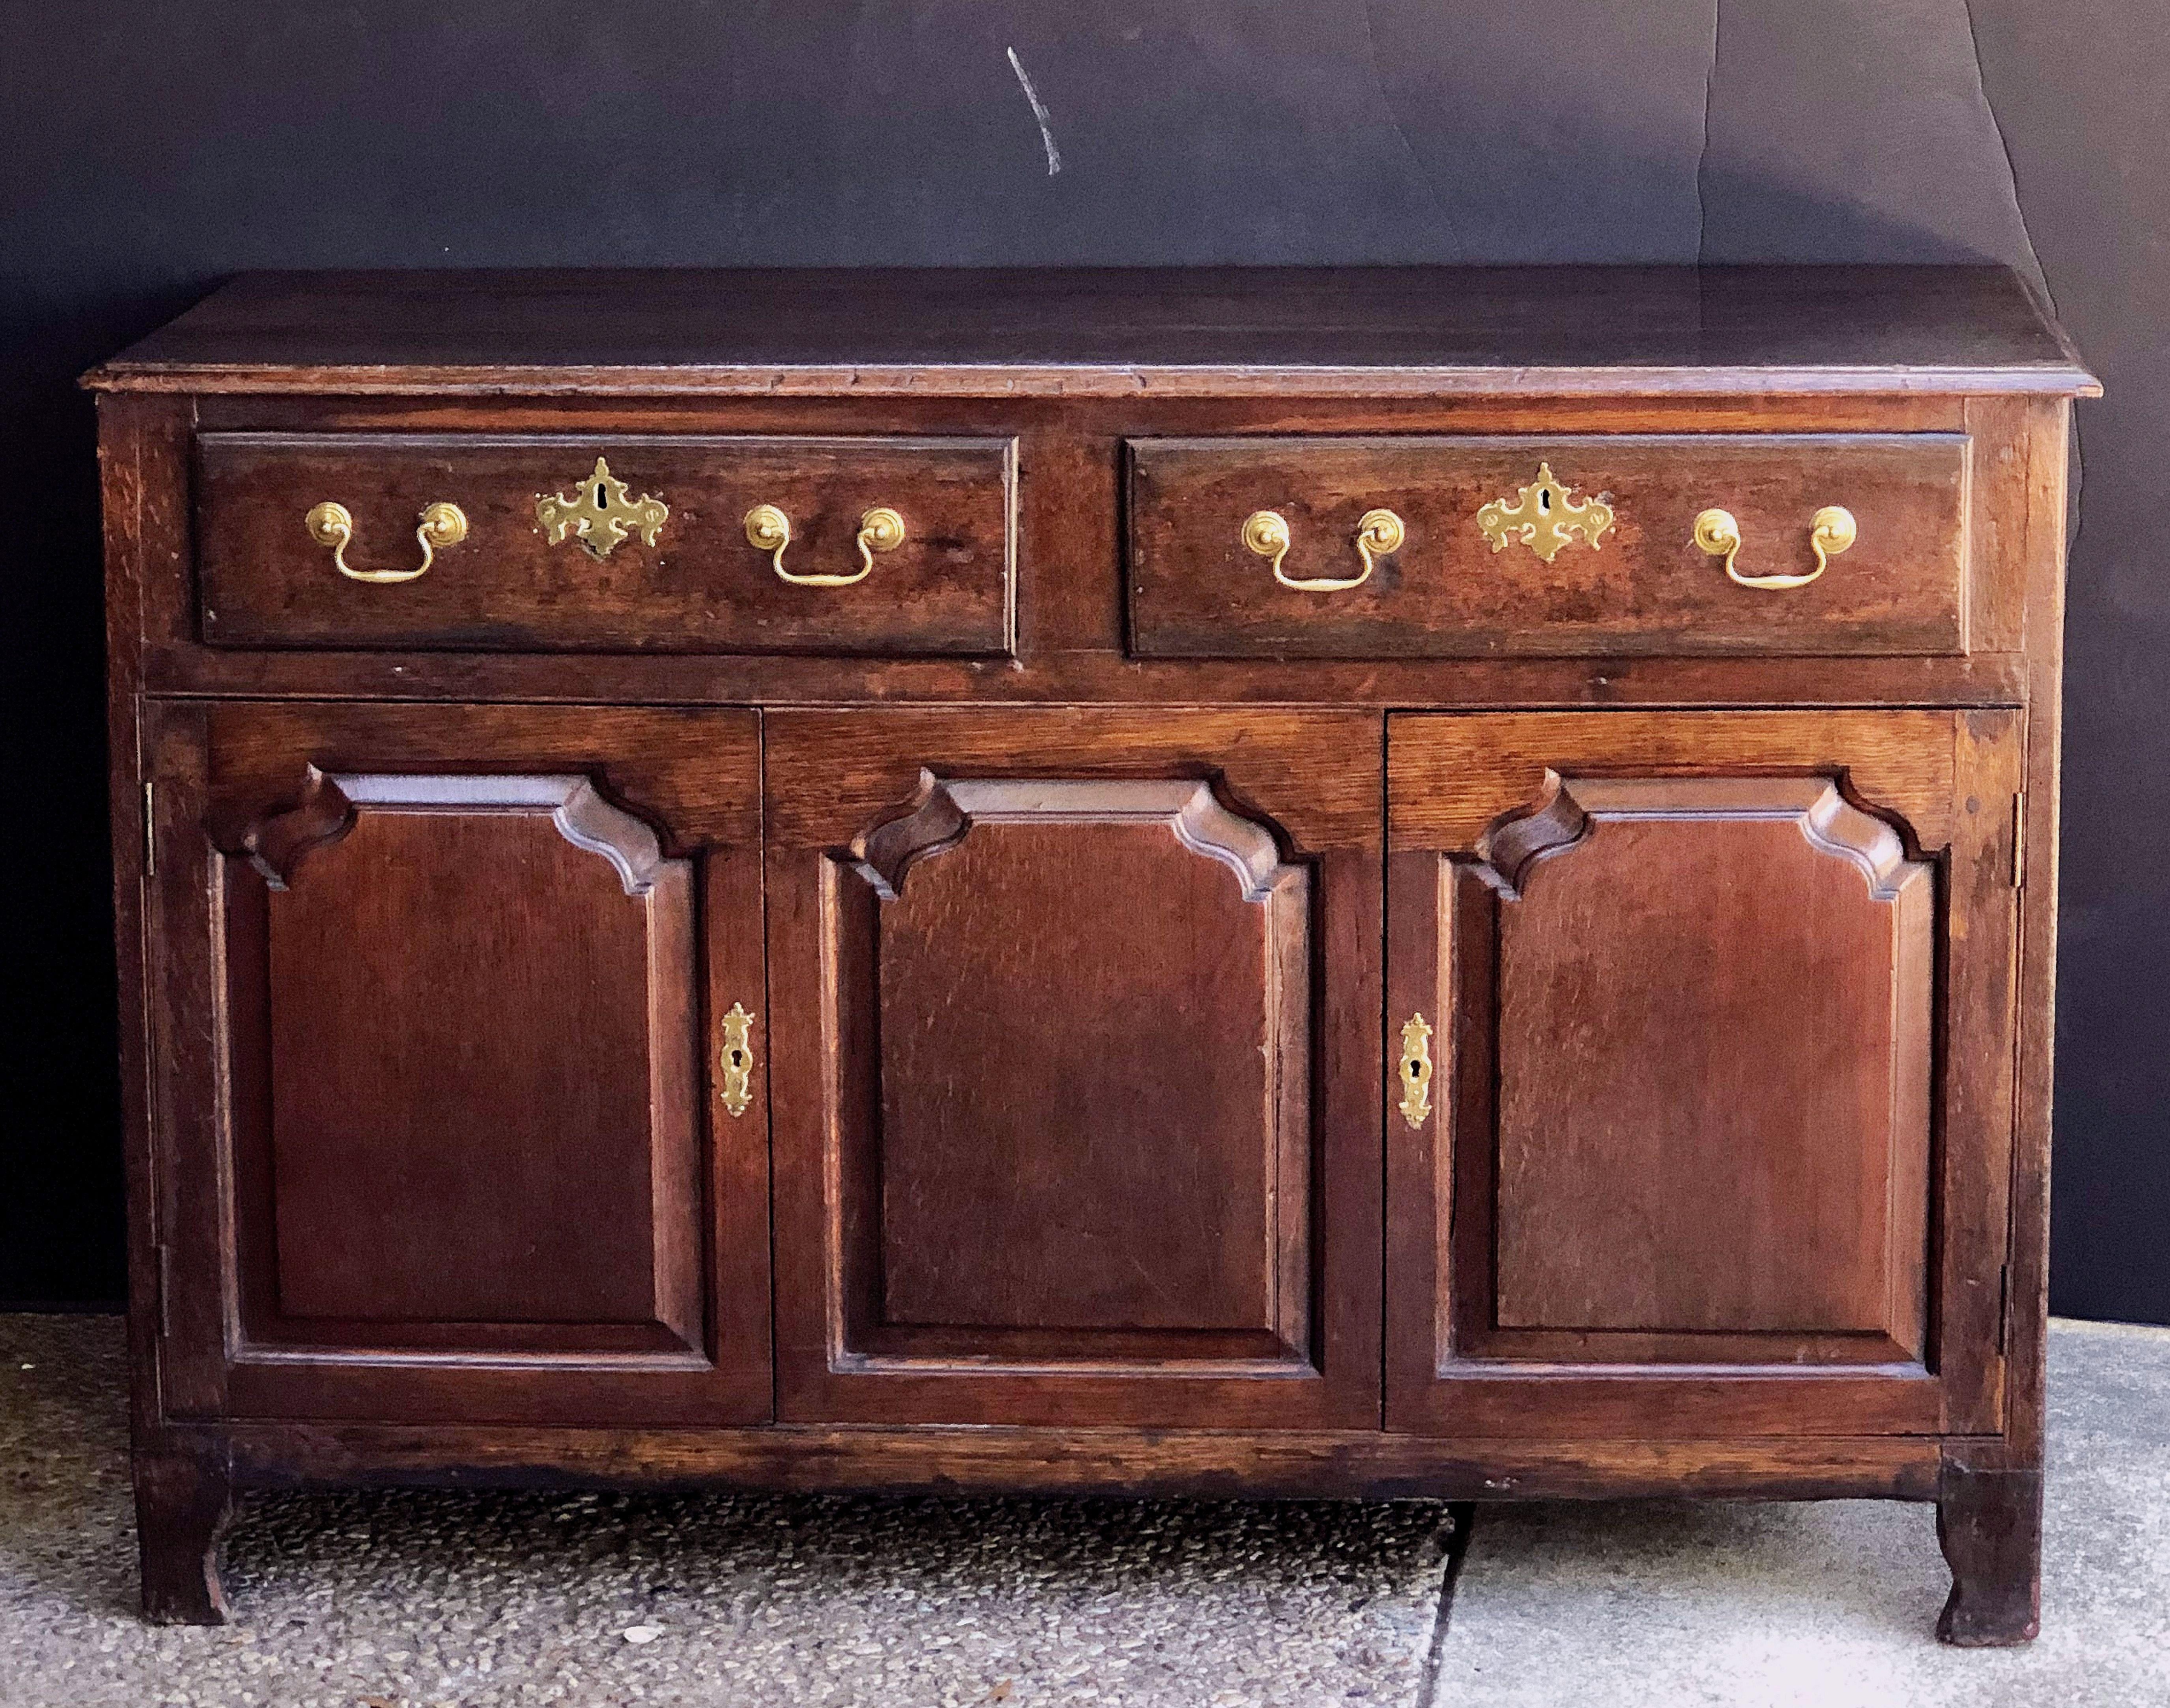 A handsome Welsh paneled dresser base or console server from the Georgian era, featuring a handsome, patinated oak top and sides with two drawers, each showing swan pulls and escutcheons of a lovely design in brass, over a cupboard base with two